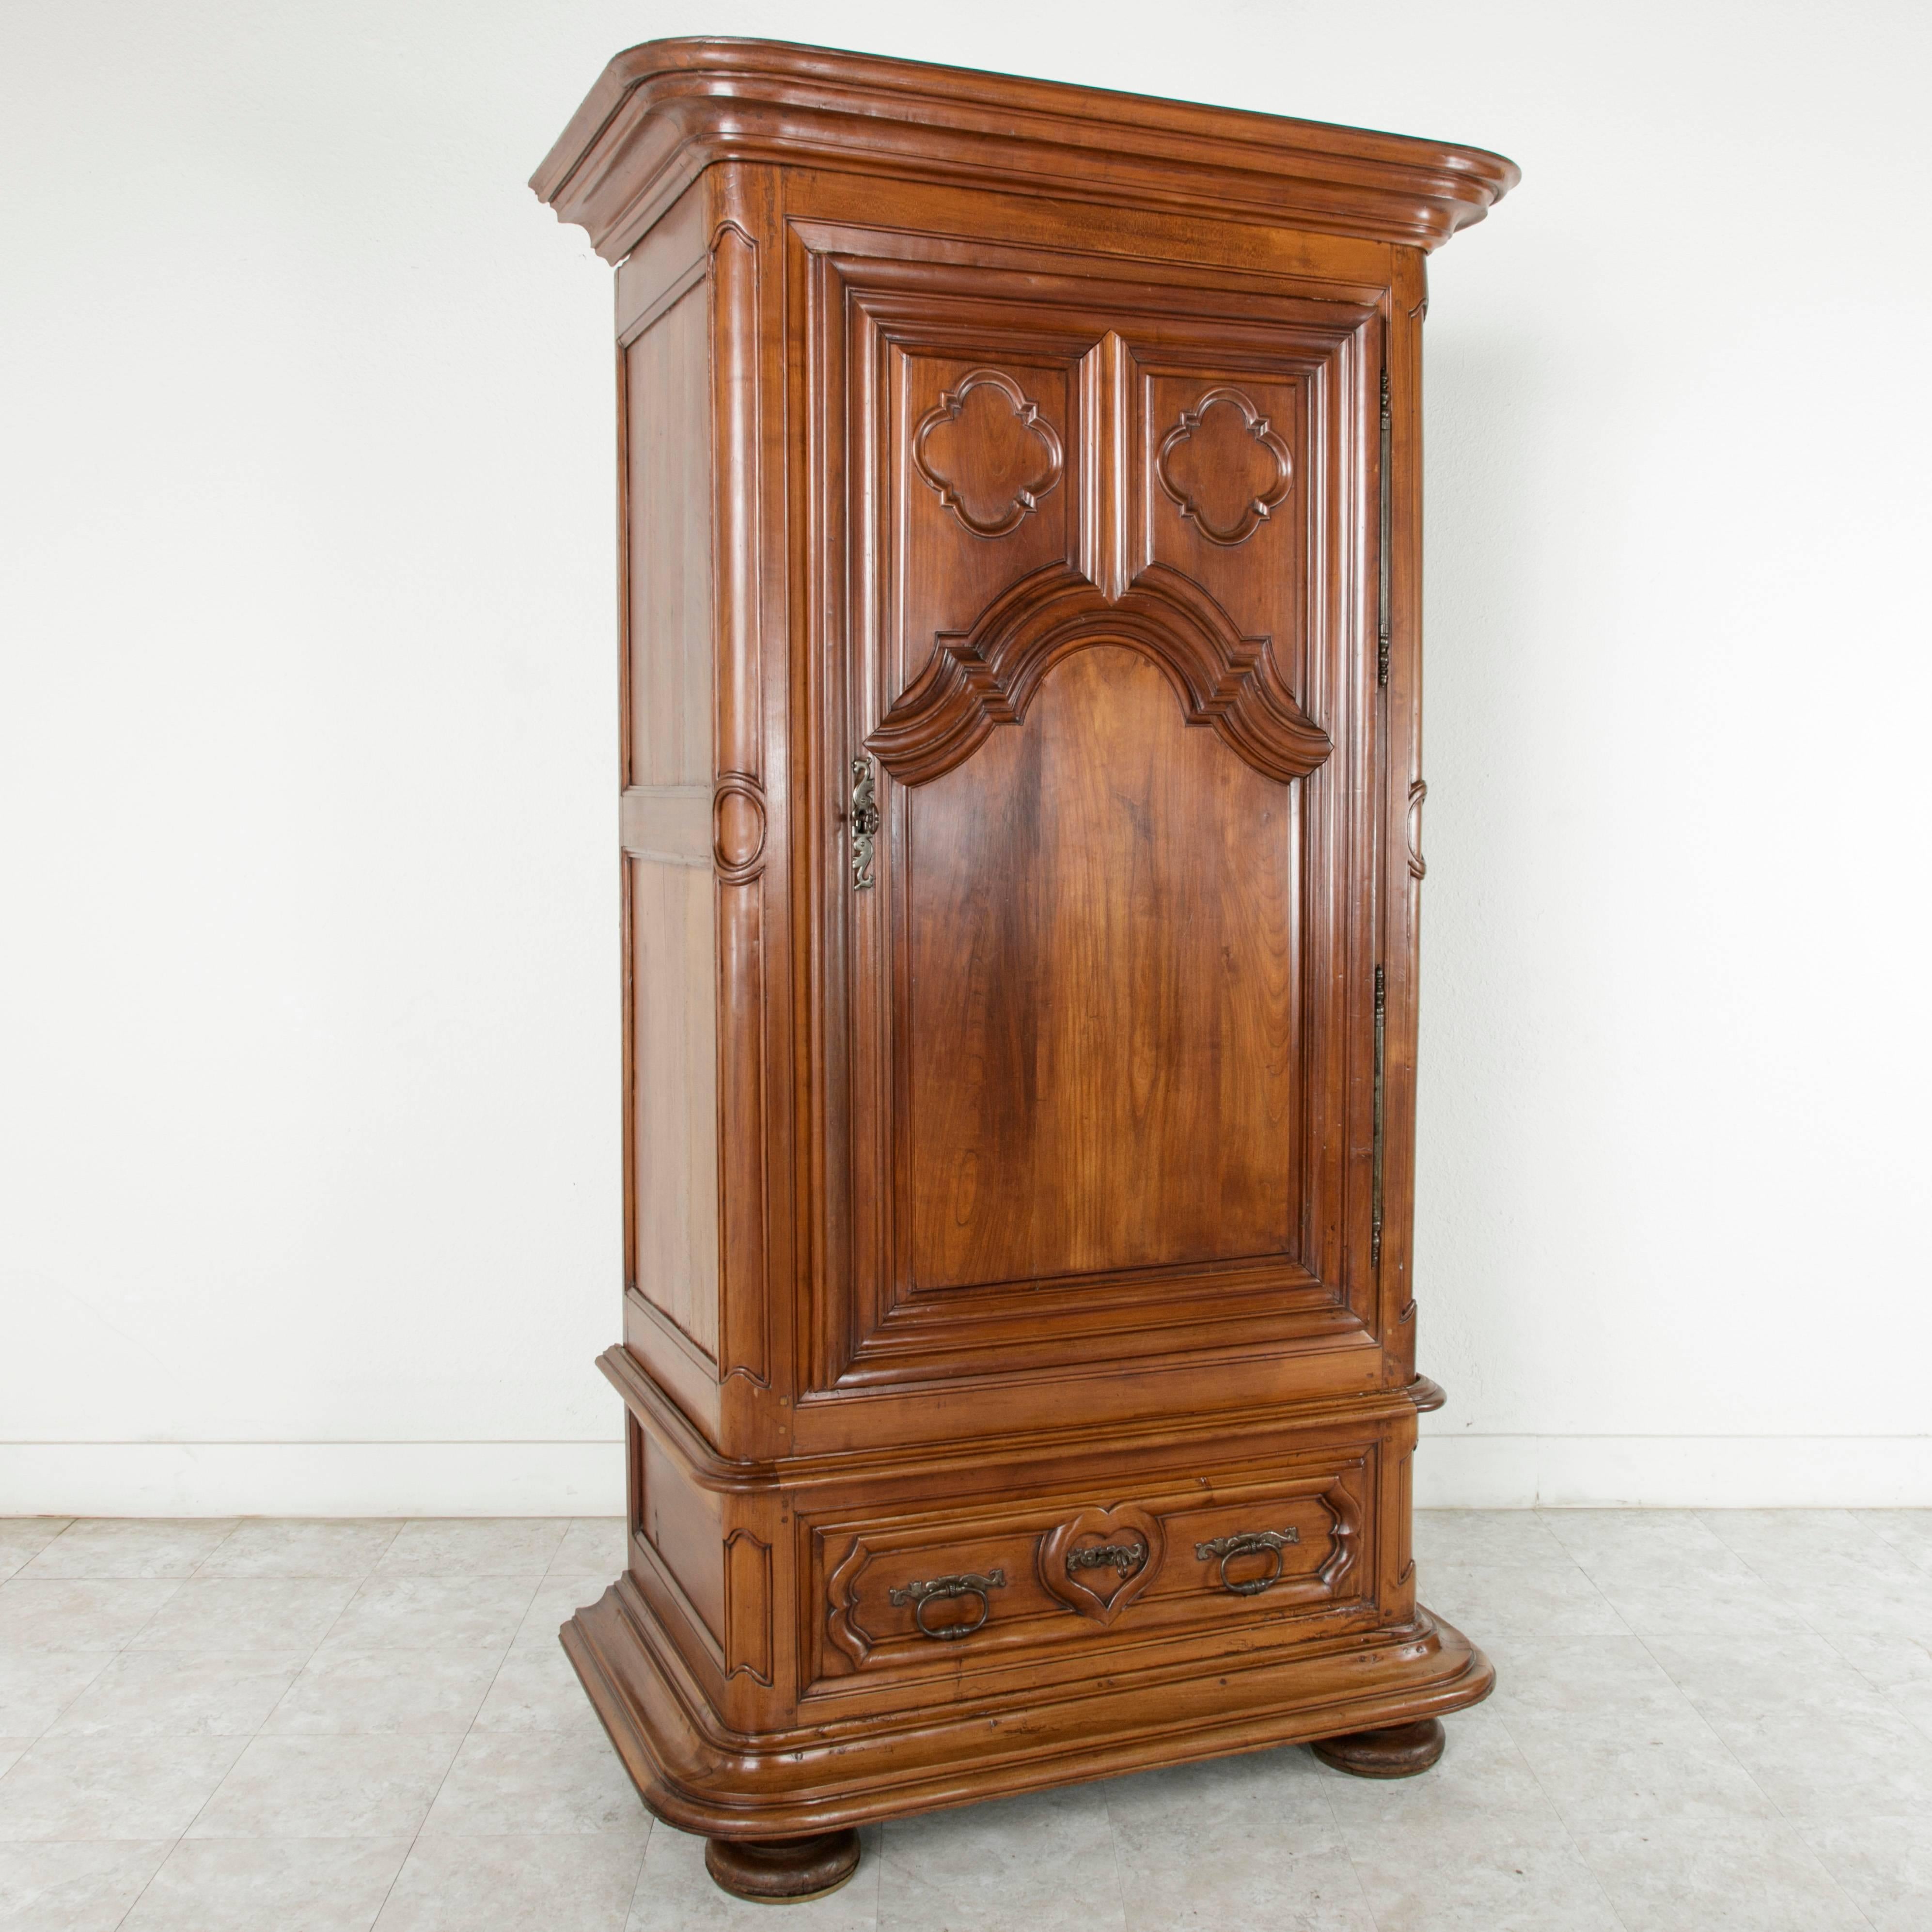 This exceptional 18th century walnut bonnetiere or armoire features hand carved deep relief panels with quadrofoils in its single door and a carved heart on its lower drawer. A classic piece in the Louis XIII style, this armoire rests on bun feet